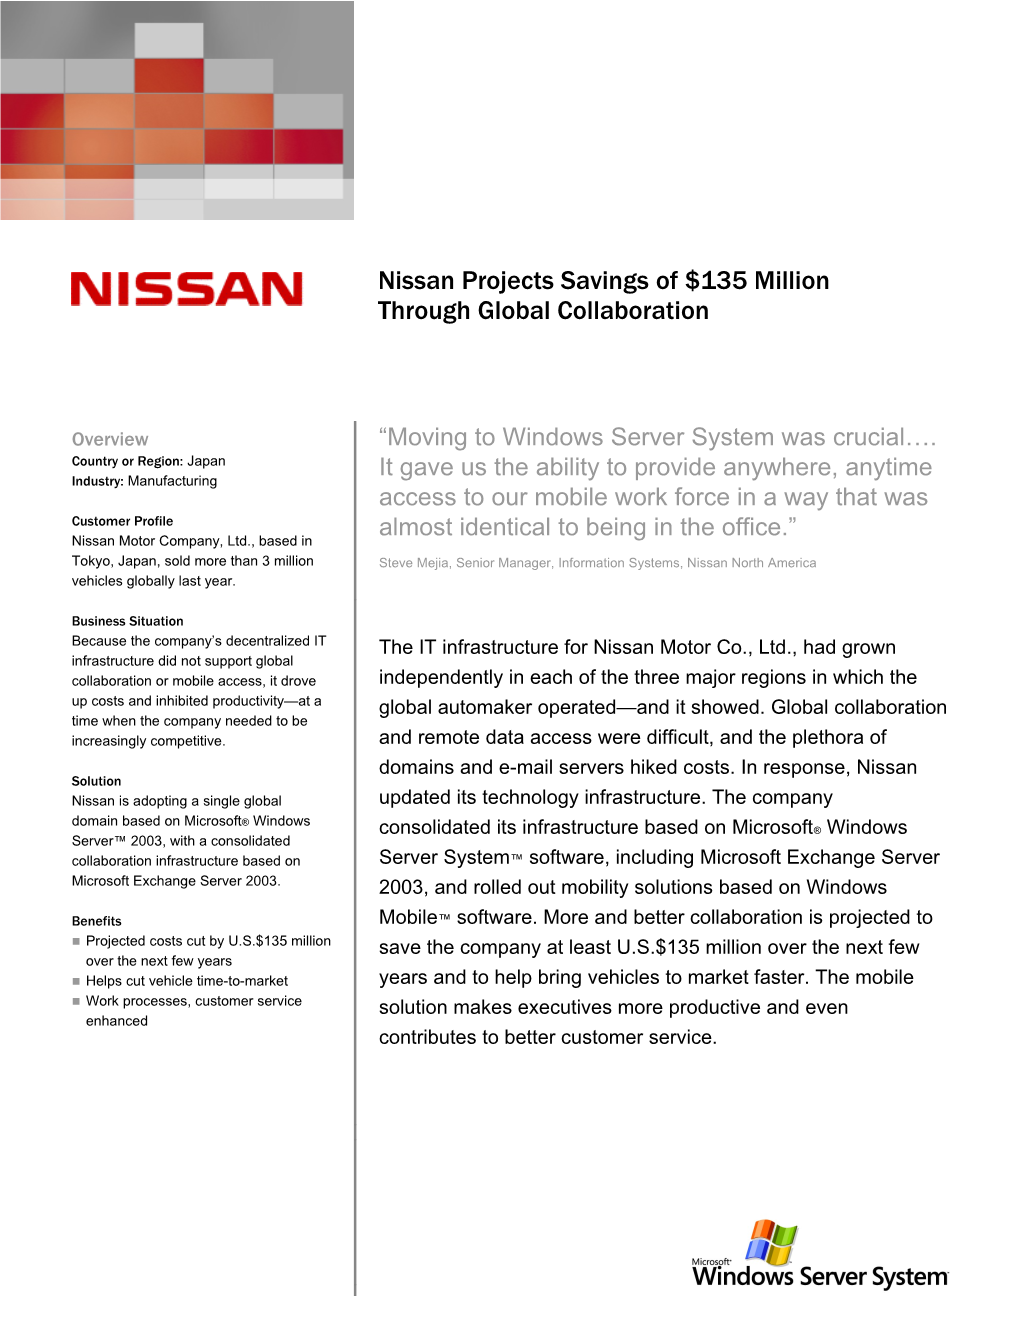 Nissan Projects Savings of $135 Million Through Global Collaboration